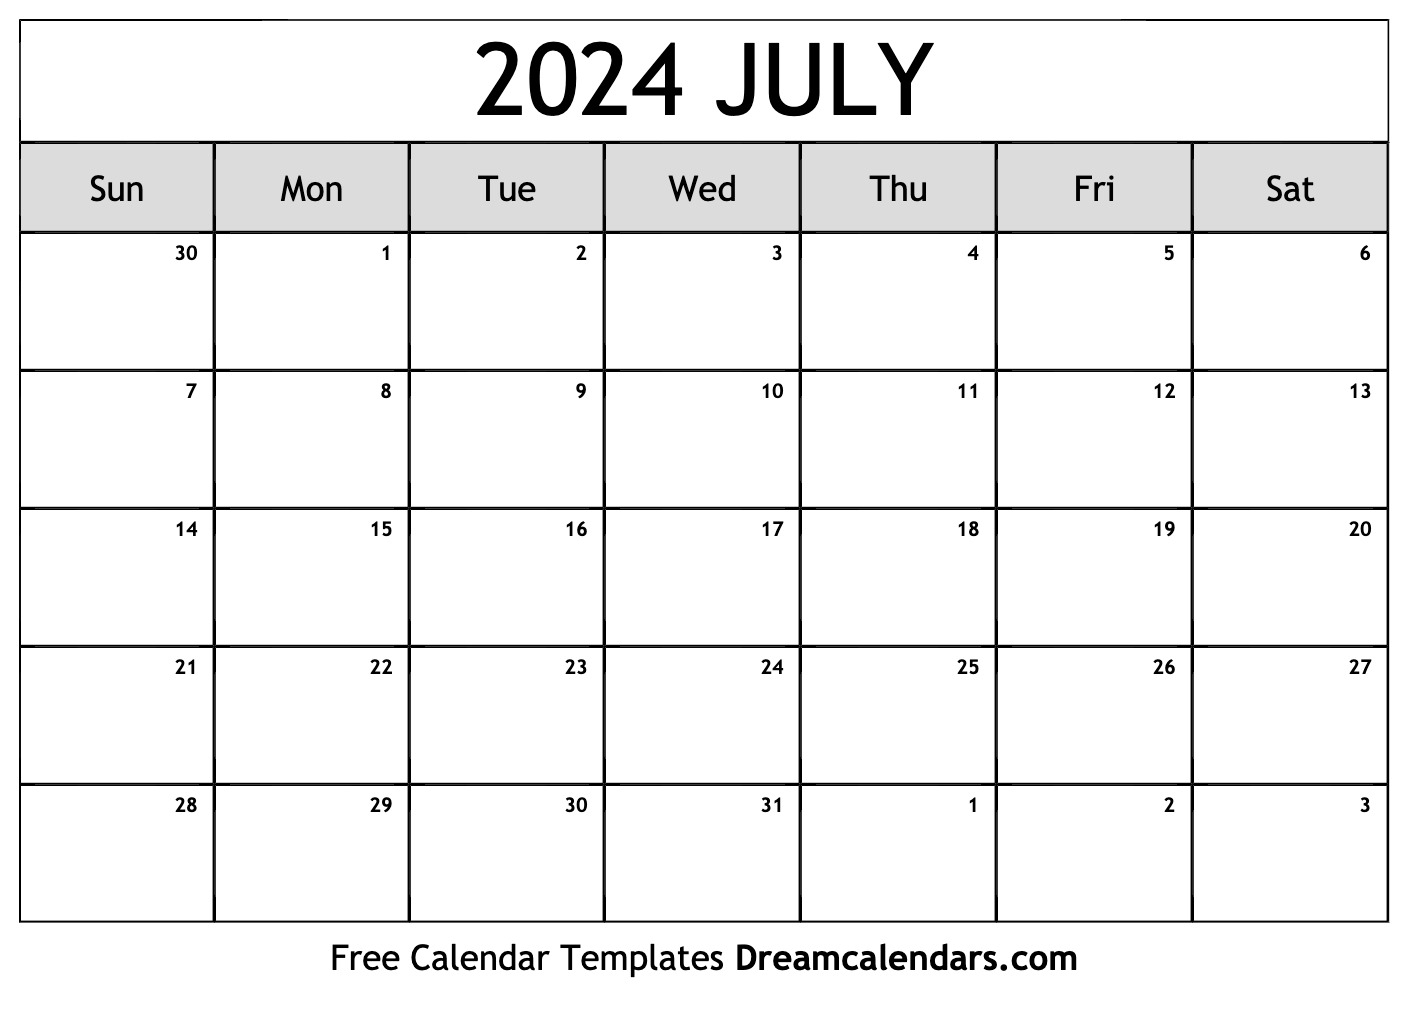 July 2024 Calendar | Free Blank Printable With Holidays for Printable Monthly Calendar 2024 July